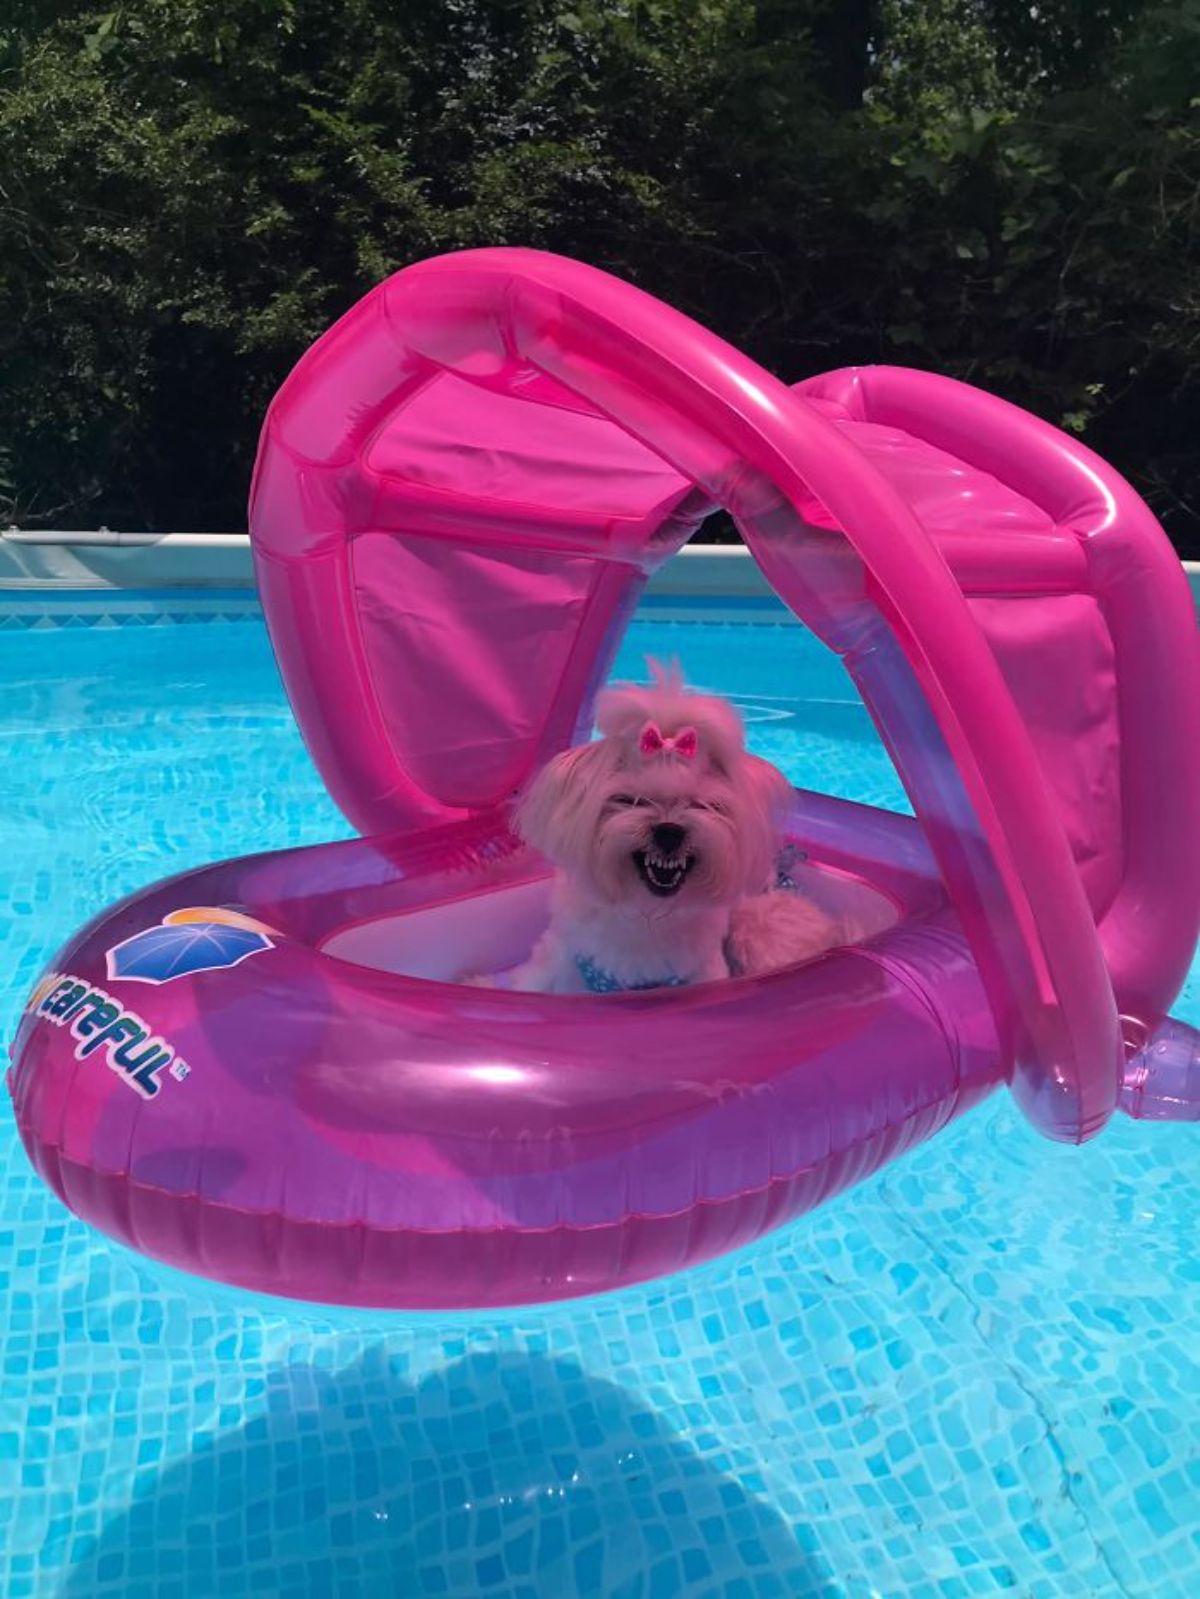 white fluffy dog with a bow in its hair sitting in a large pink pool float with a roof snarling at the camera